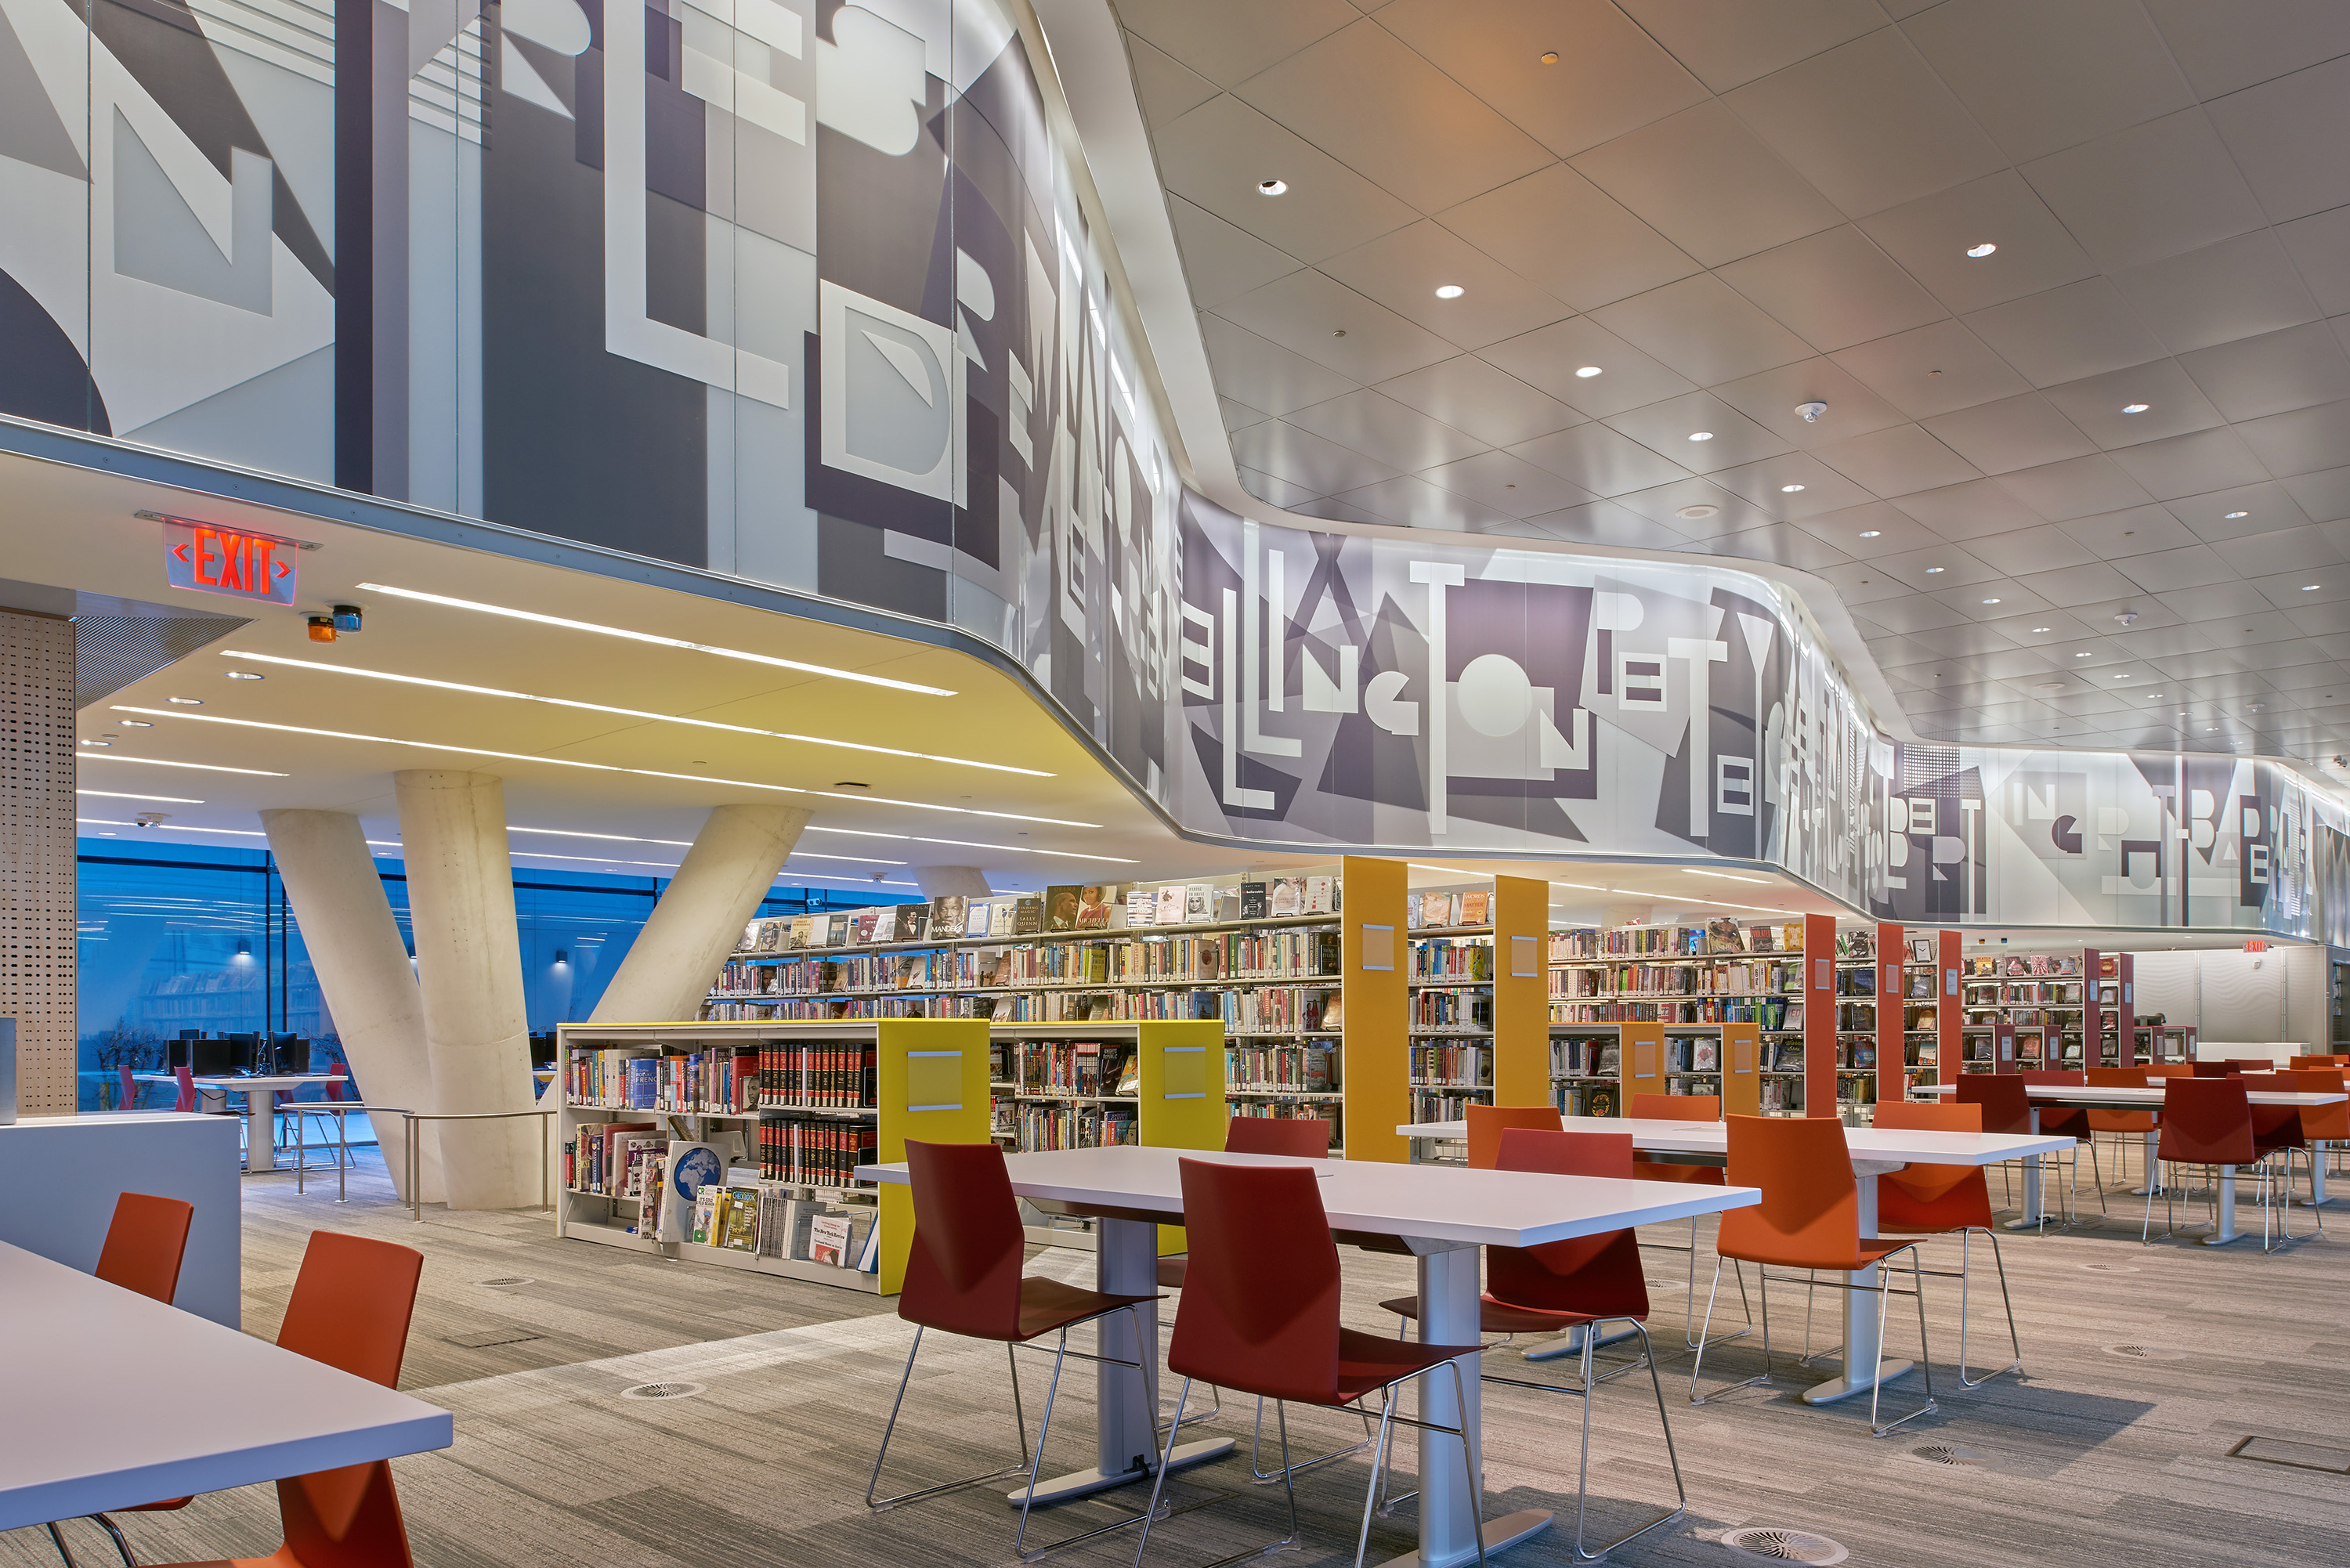 The library space seamlessly integrates with the building design.